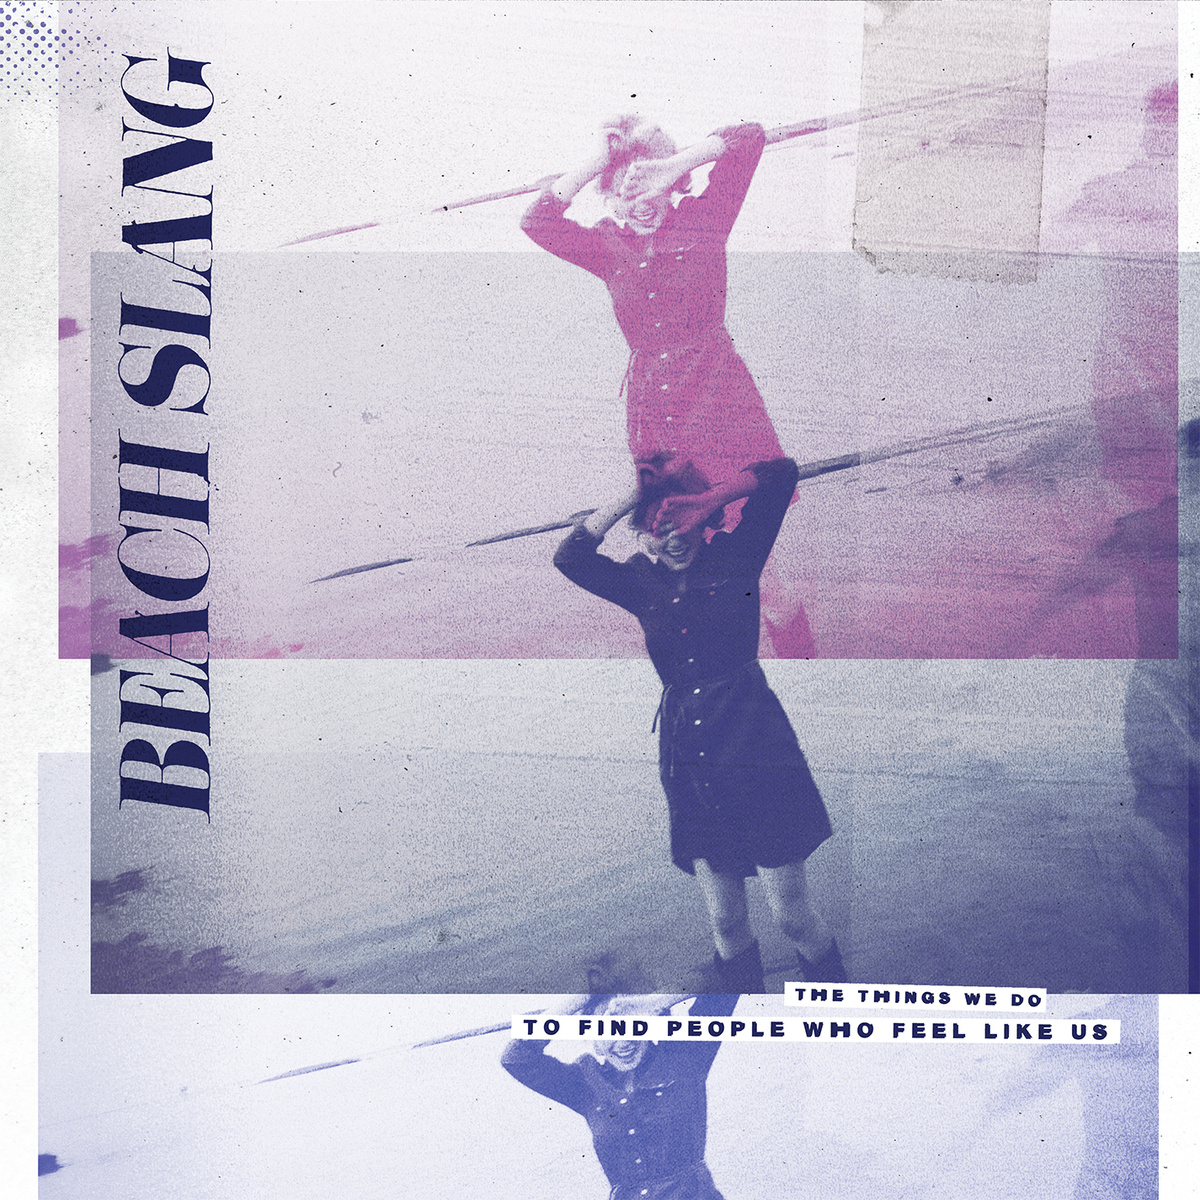 30. BEACH SLANG | "THE THINGS WE DO TO FIND PEOPLE THAT FEEL LIKE US"